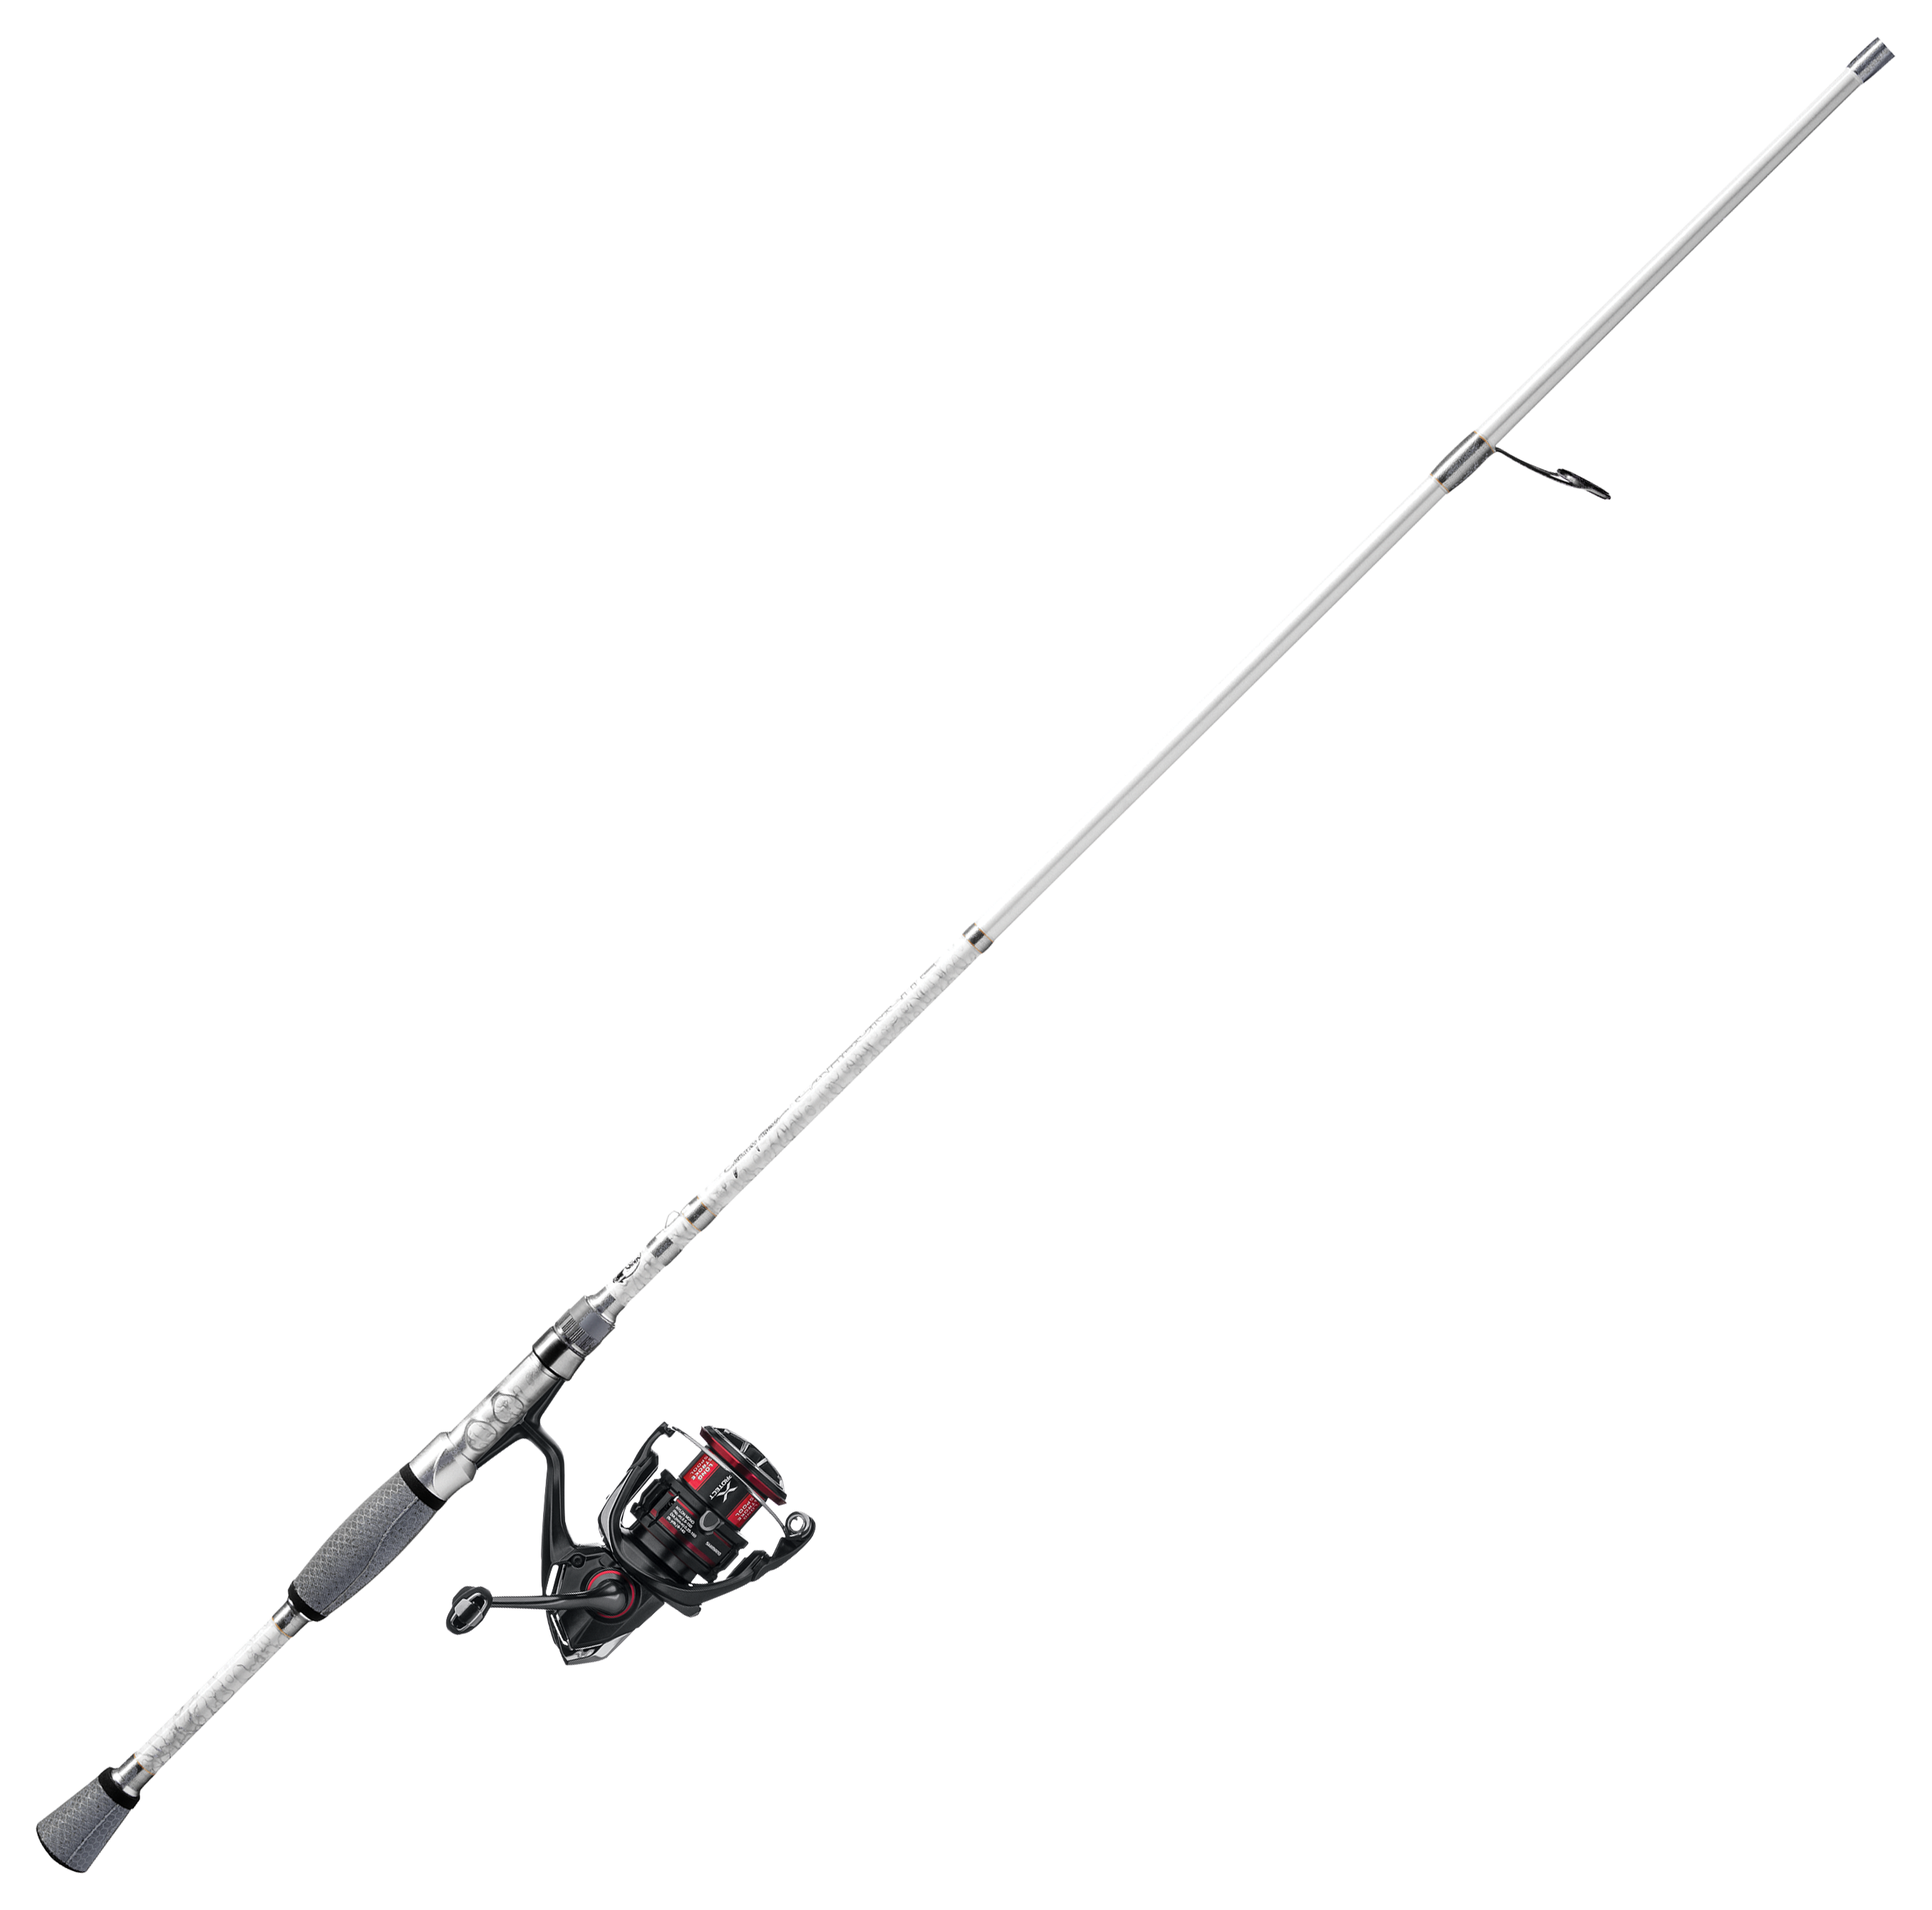 Pflueger President/Bass Pro Shops Micro Lite Spinning Rod and Reel